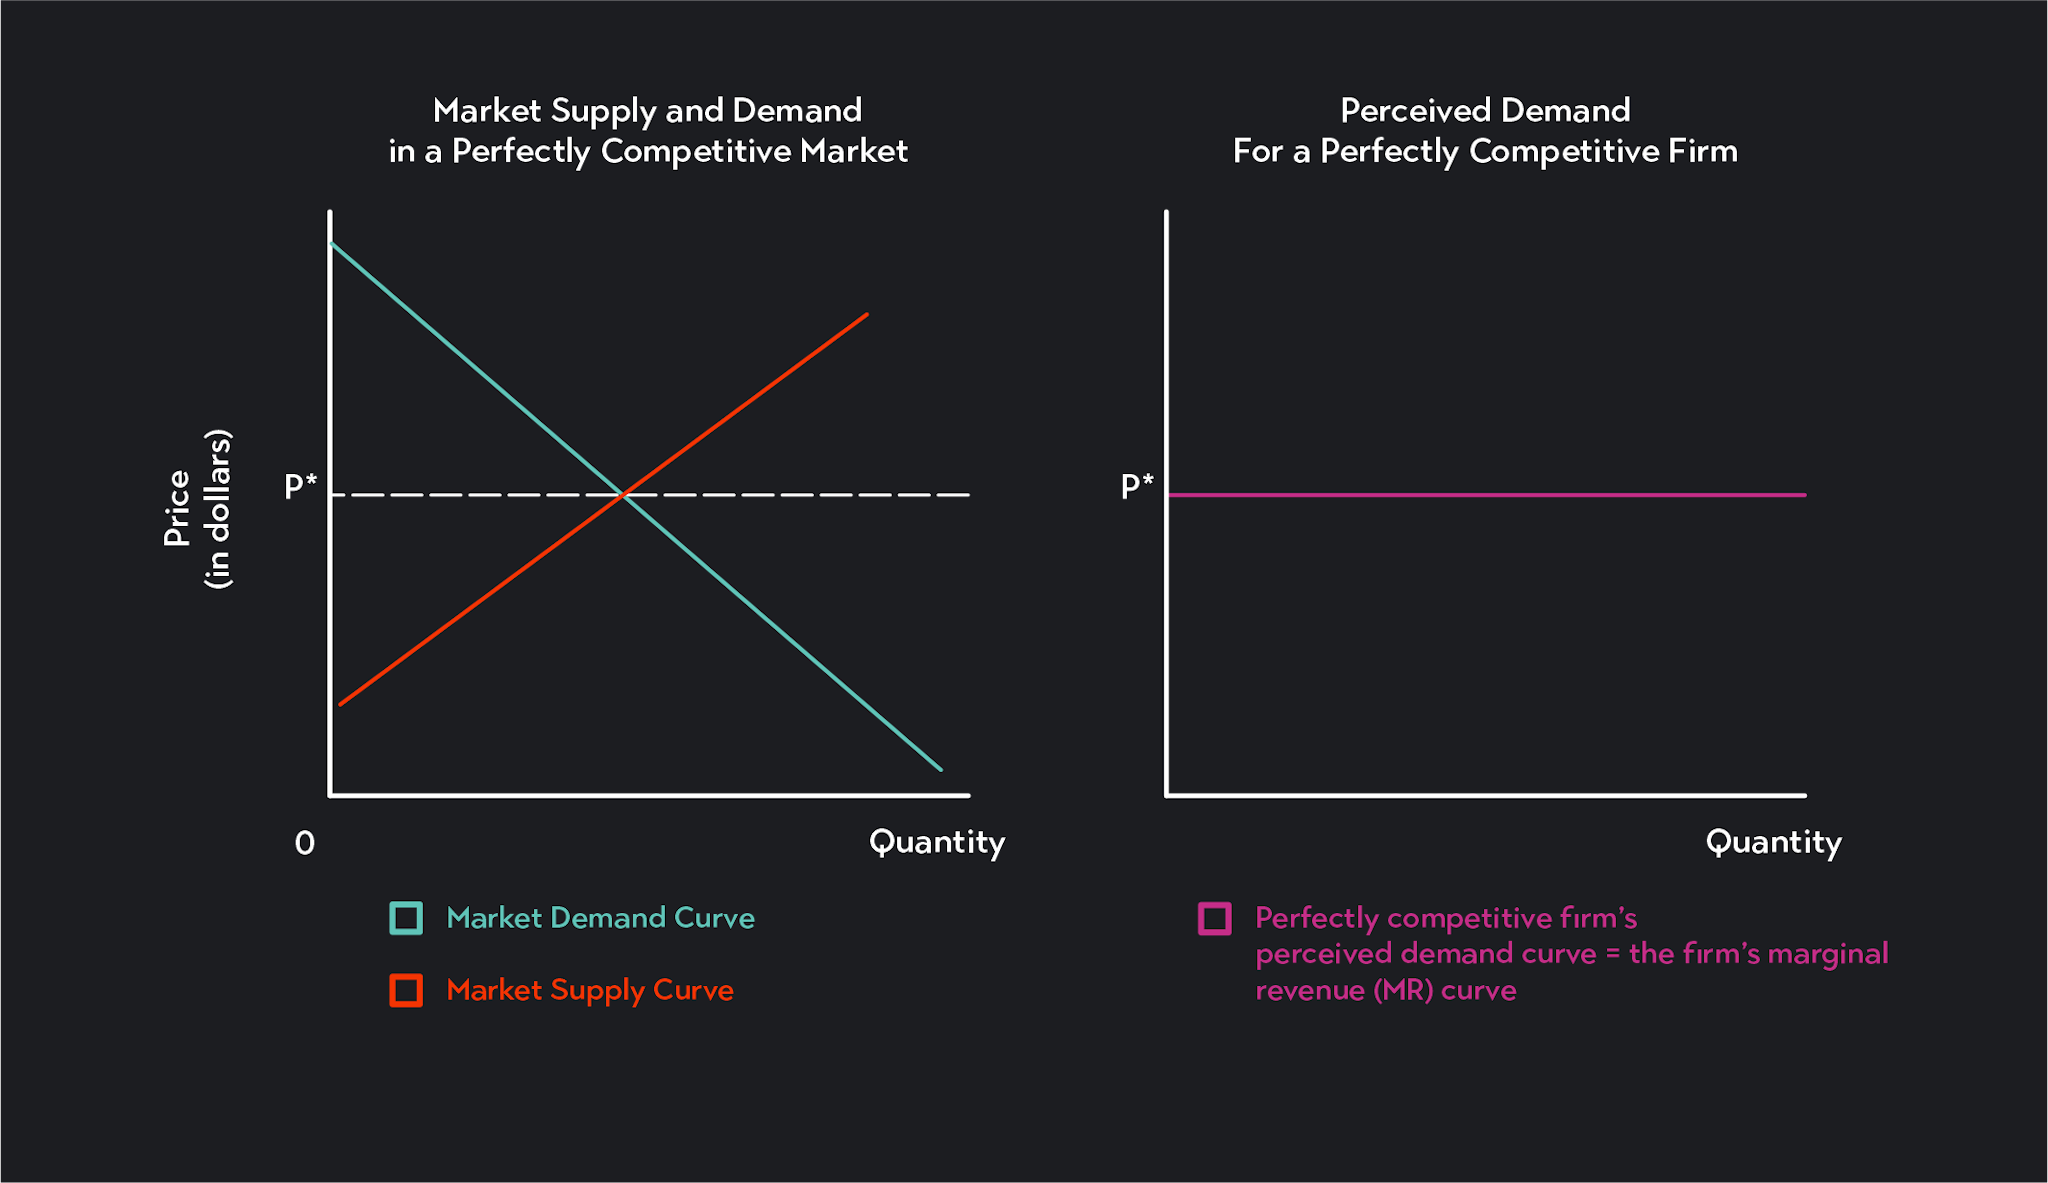 Graph of market supply and demand in a perfectly competitive market, and a graph of perceived demand in a perfectly competitive firm